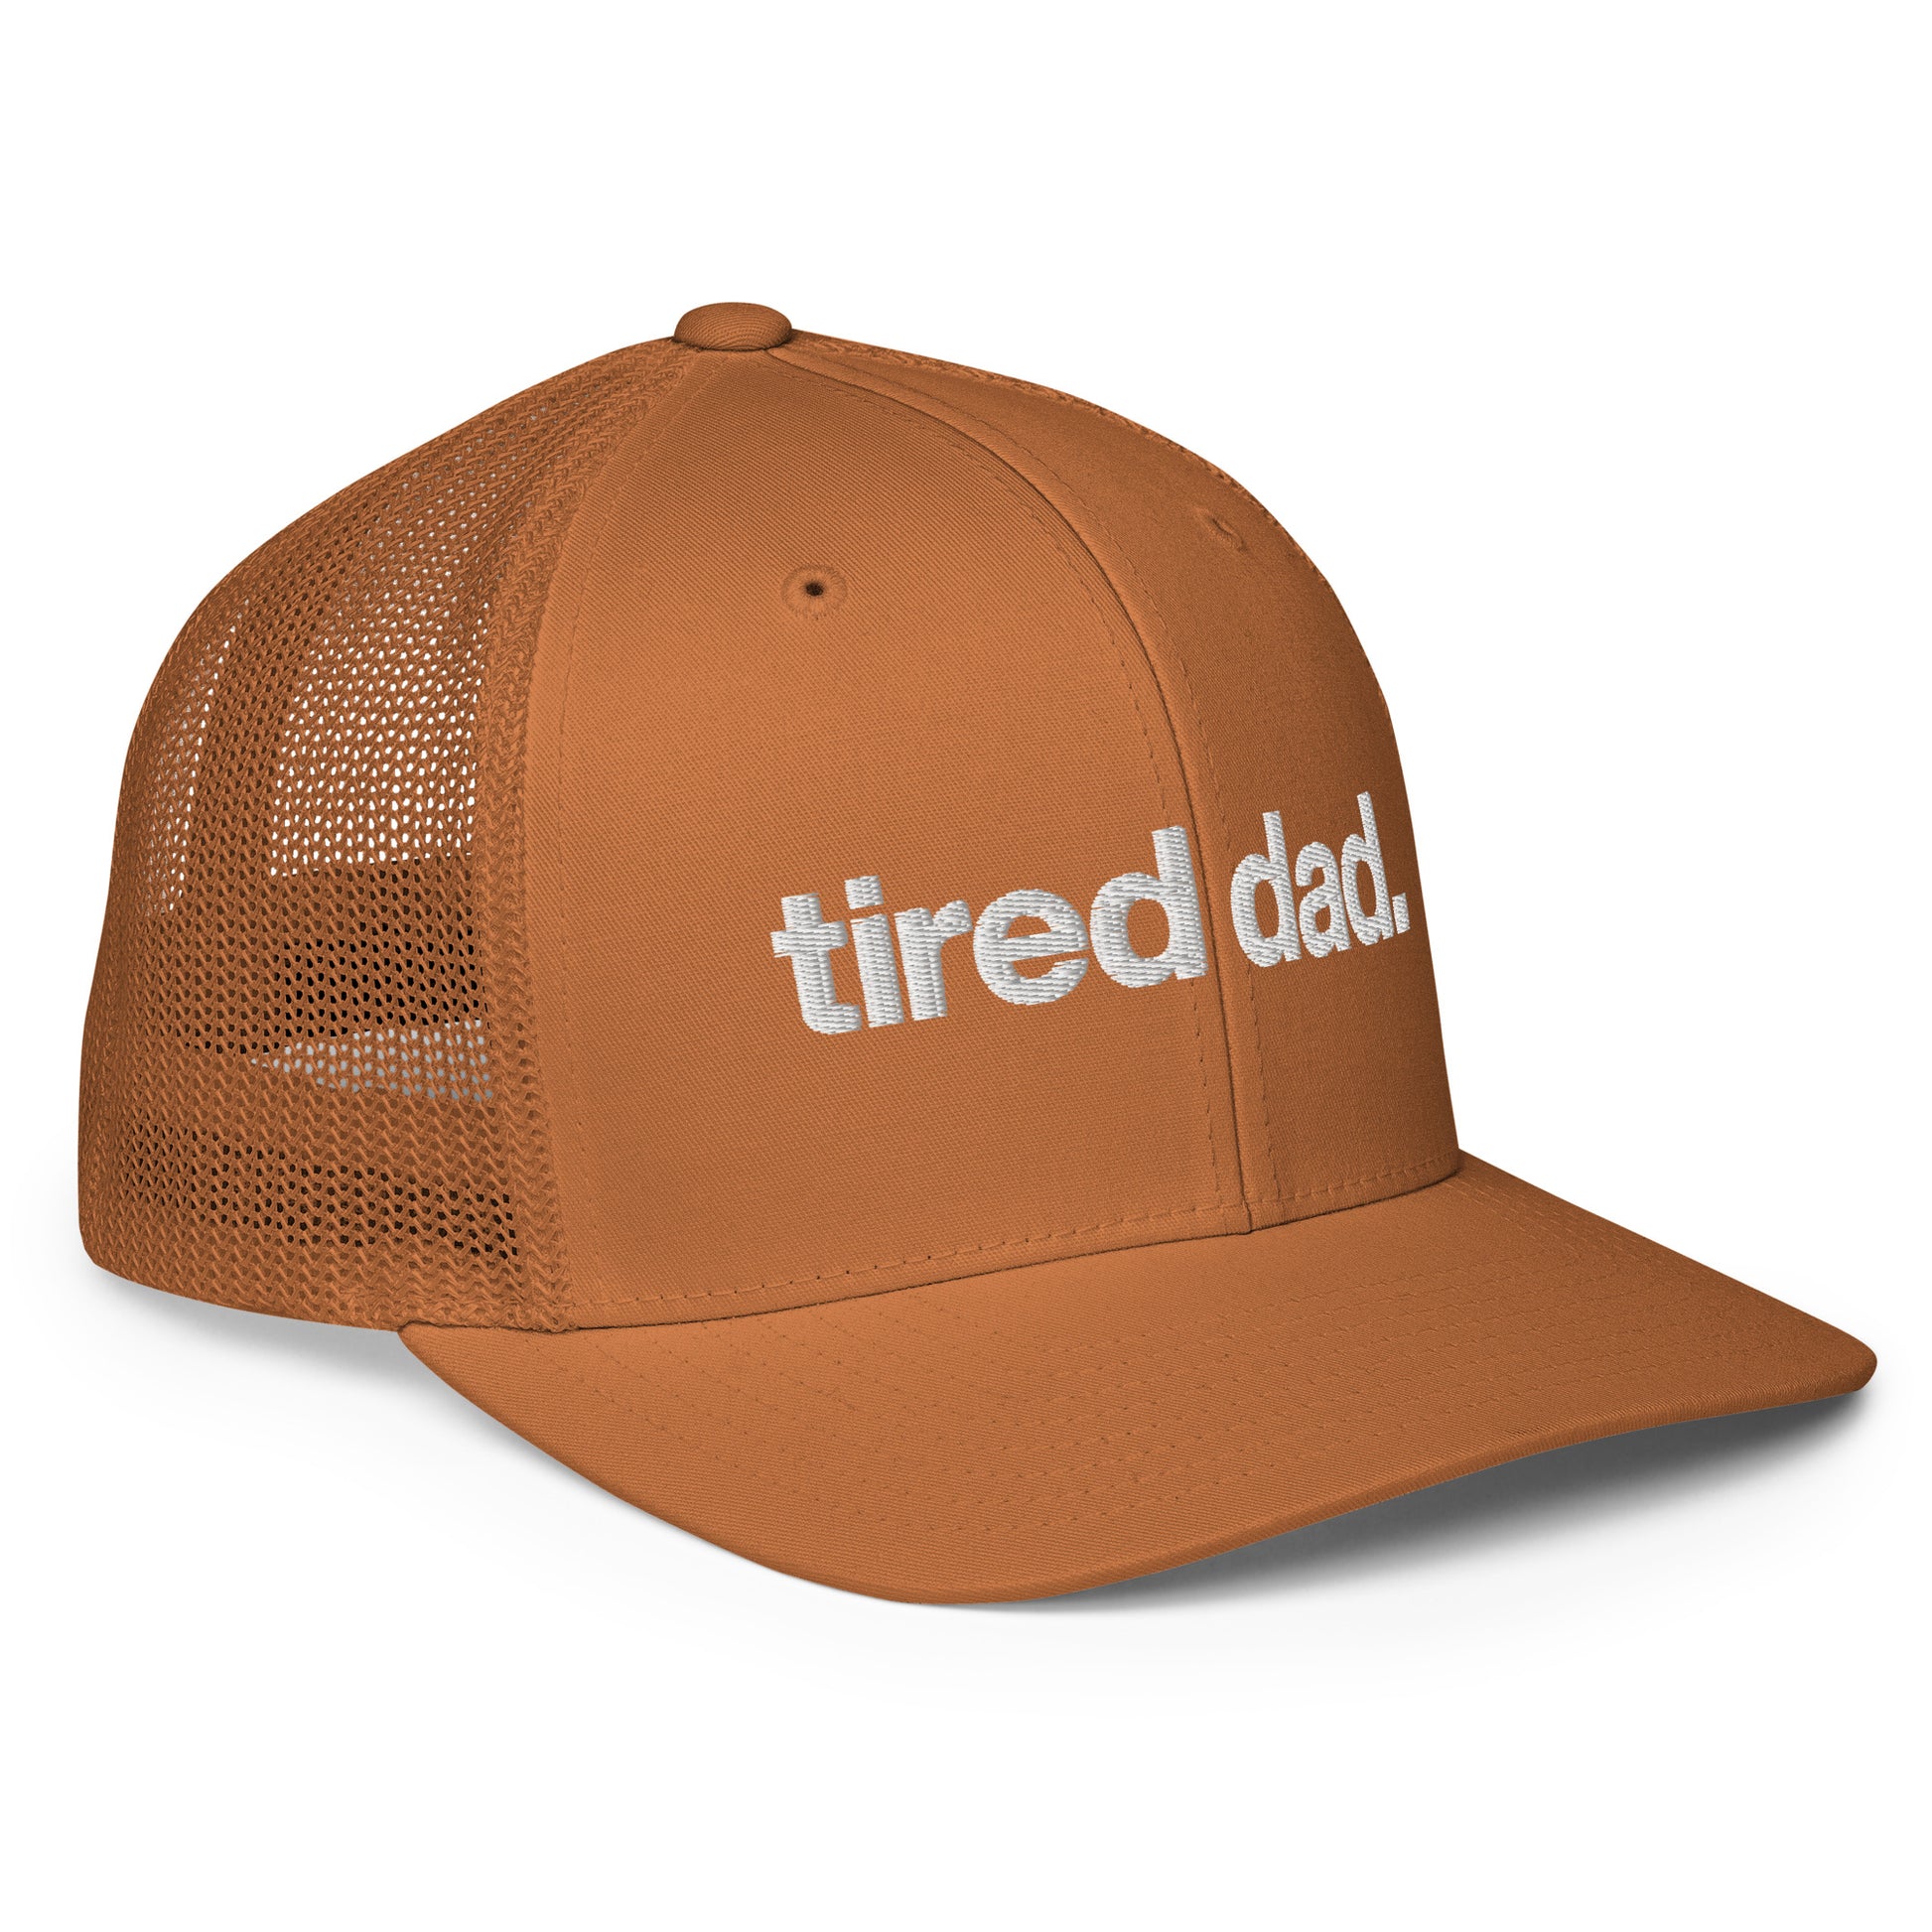 hat – tired Tired dad. flex-fit